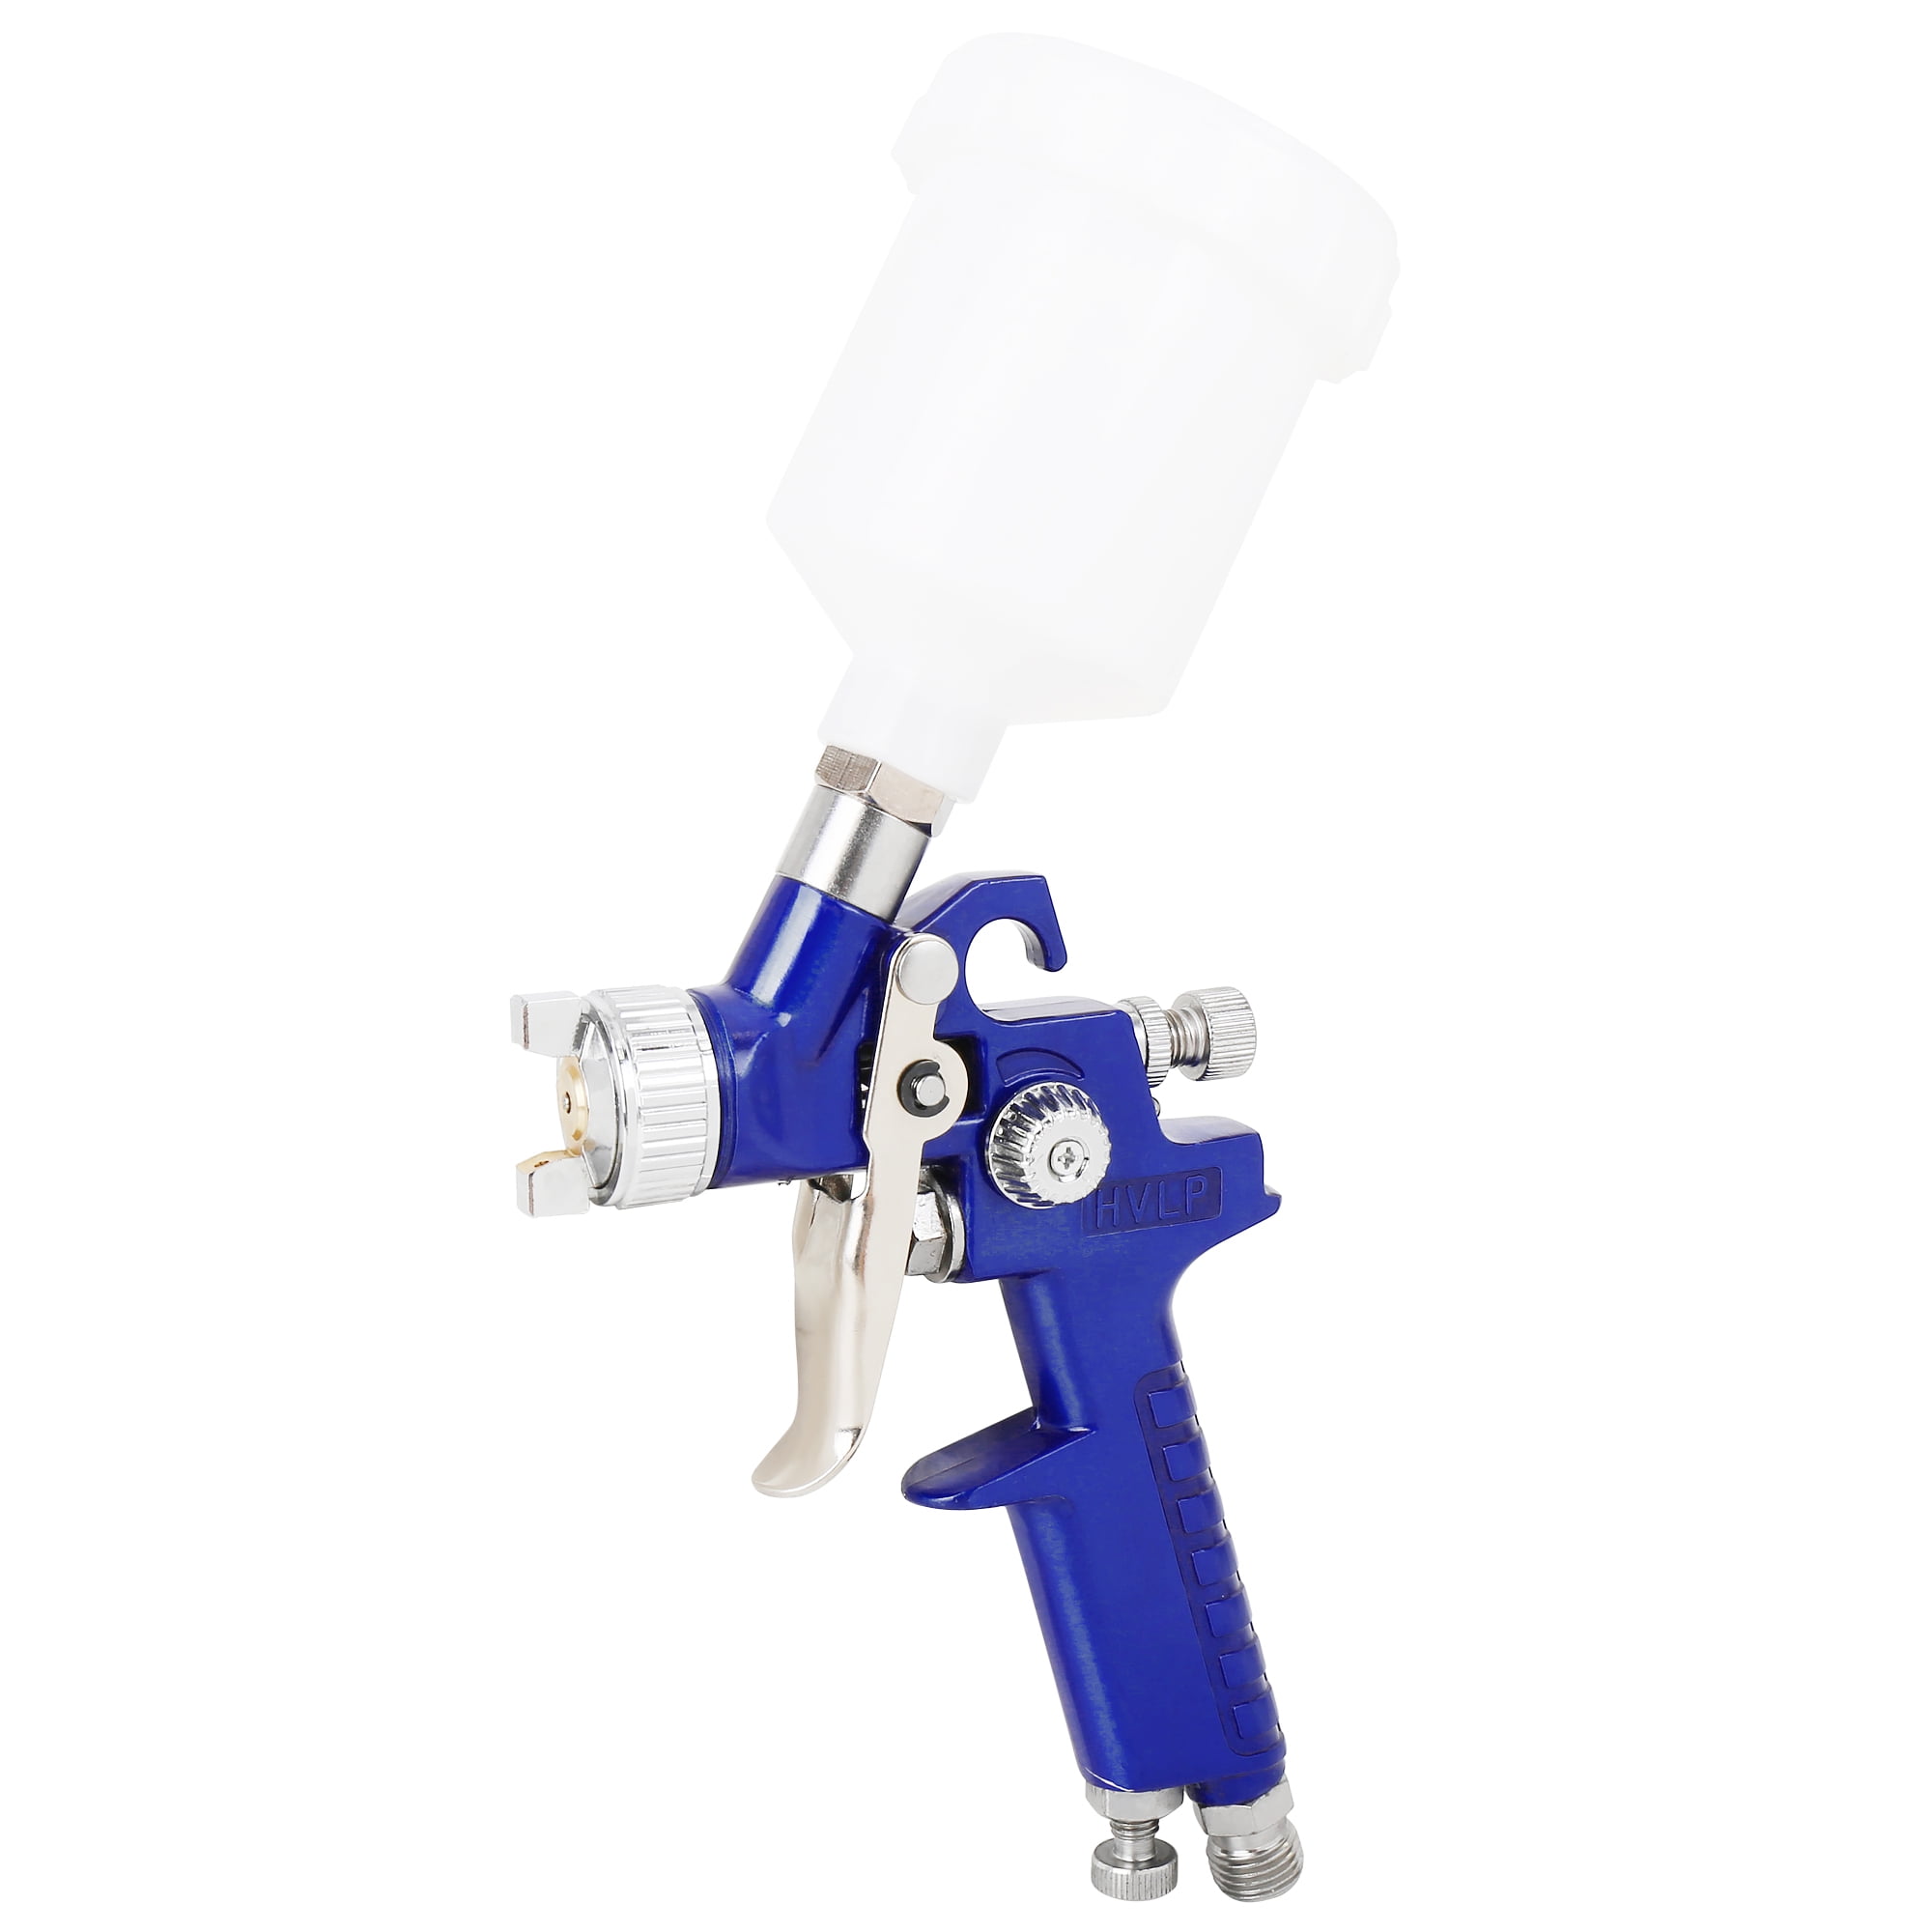 1.0 mm Nozzle Gravity Feed HVLP Air Spray Paint Gun Auto Primer Spot Touch up 